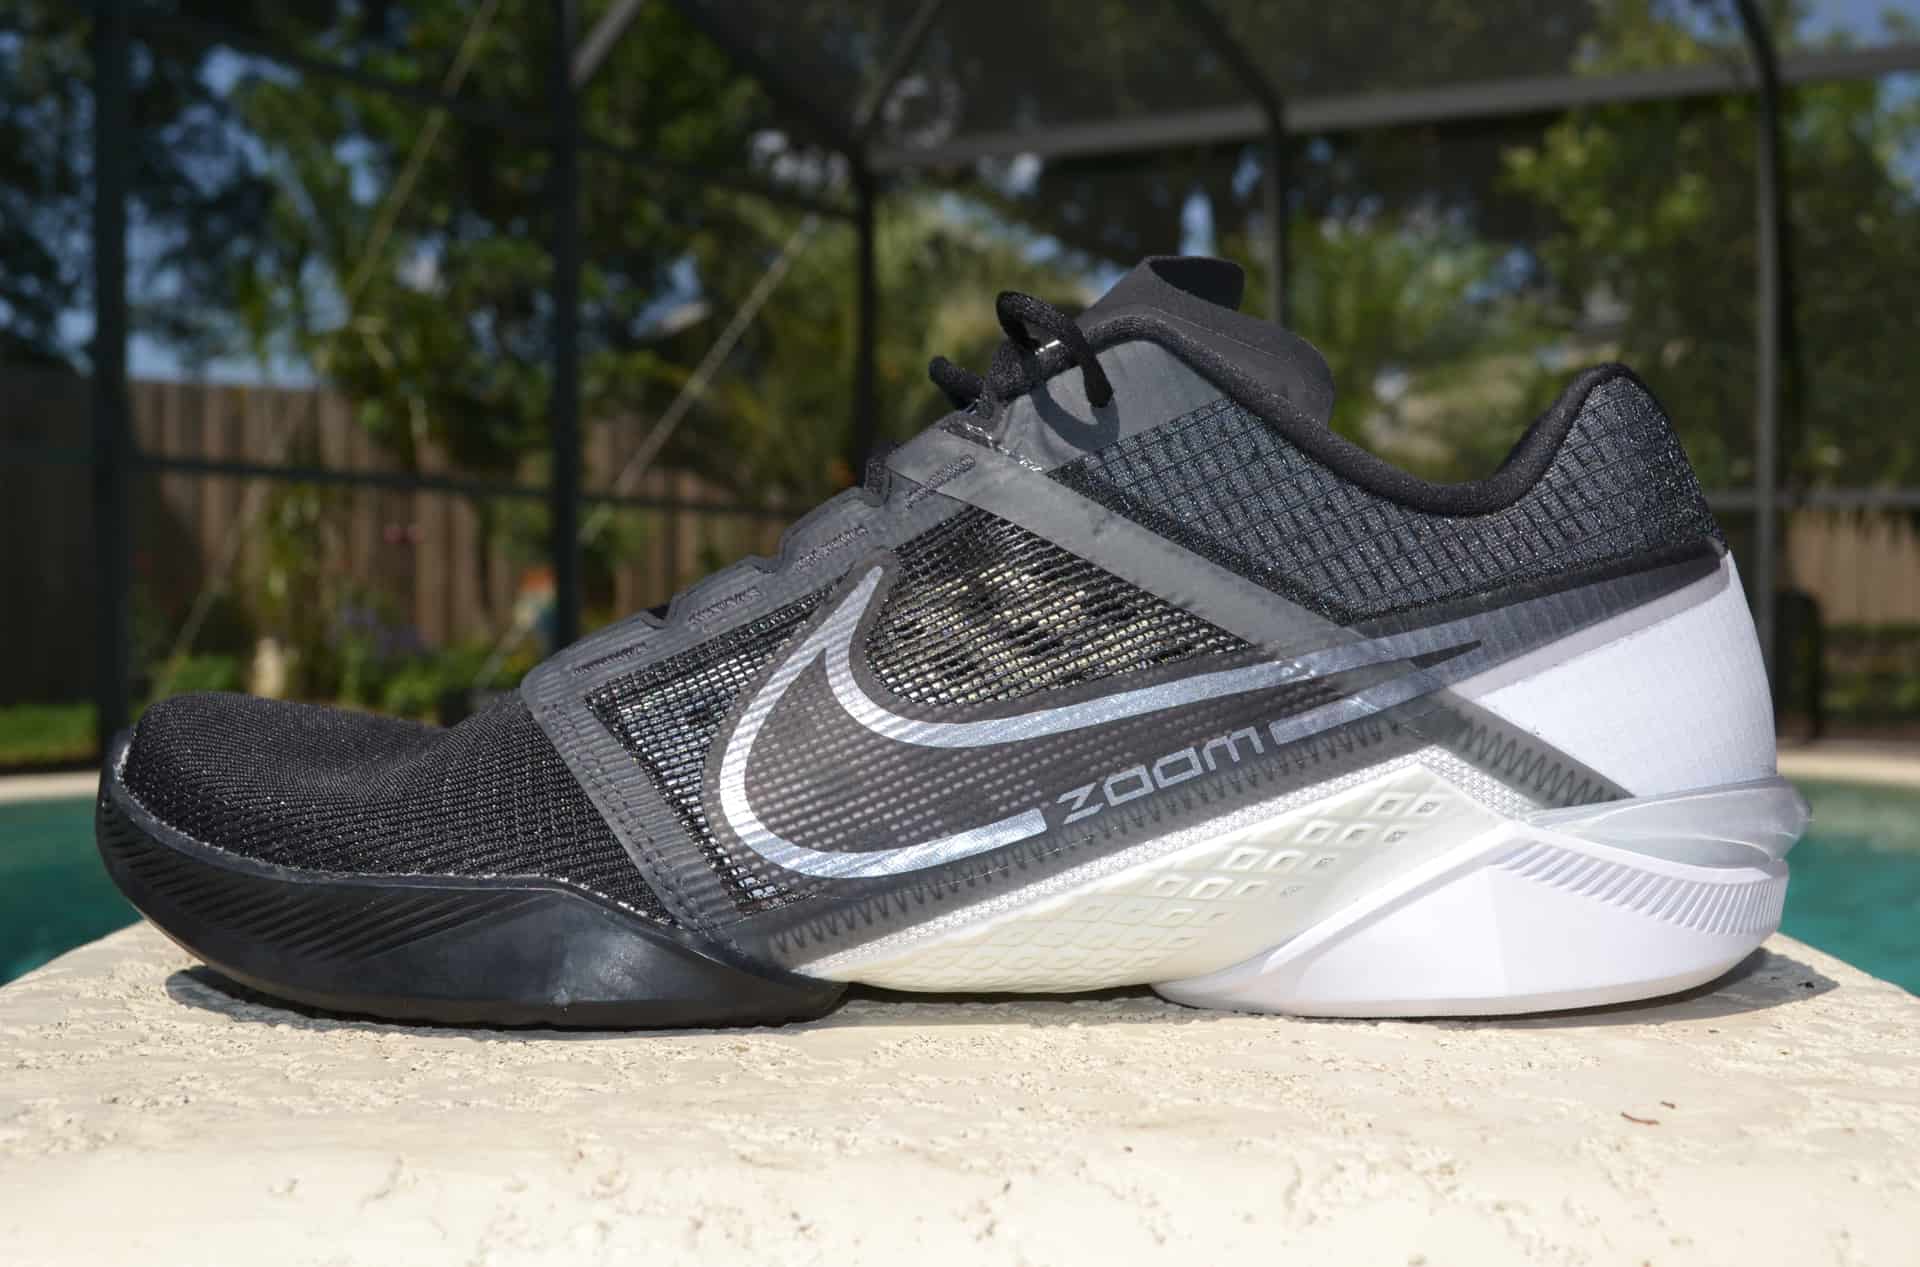 Nike Zoom Metcon Turbo 2 Shoe Review - Cross Train Clothes